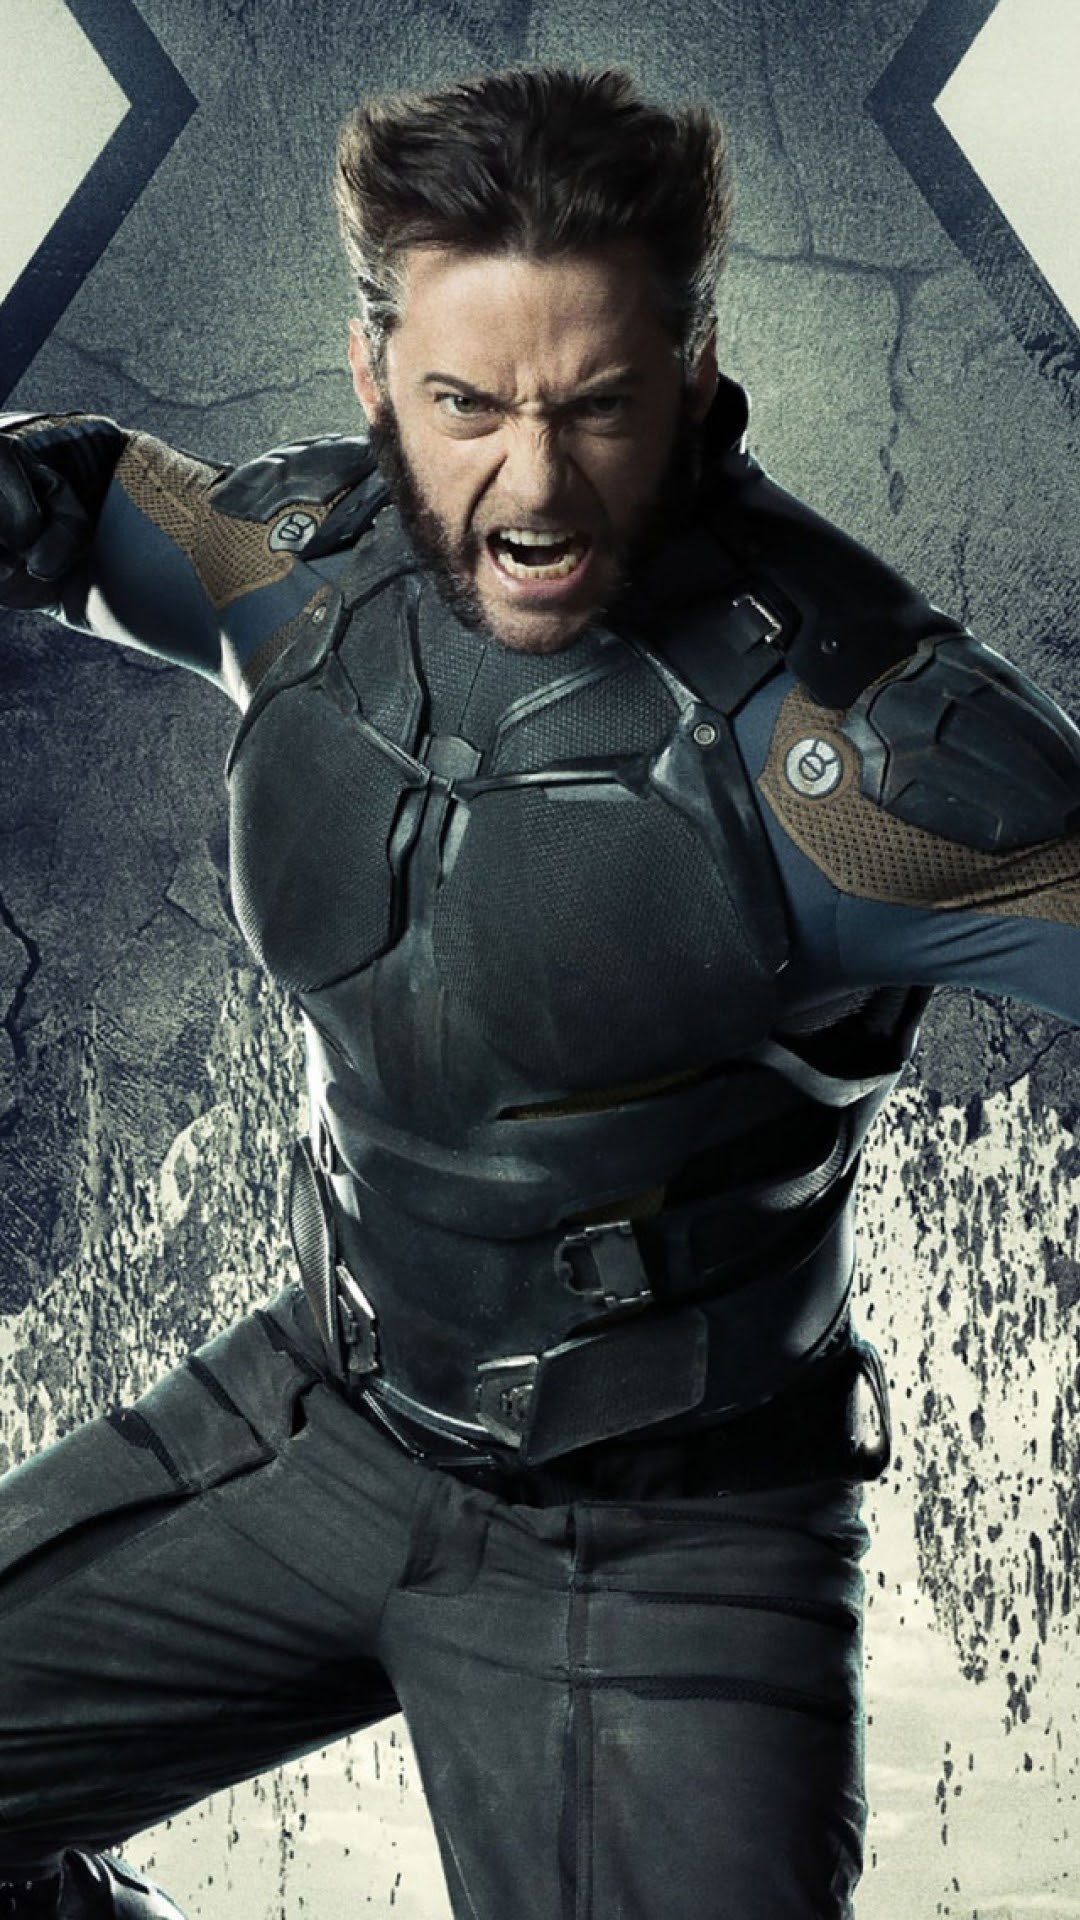 X-Men: Days of Future Past, Best wallpapers for Android, Wolverine in X-Men, Superhero art, 1080x1920 Full HD Phone